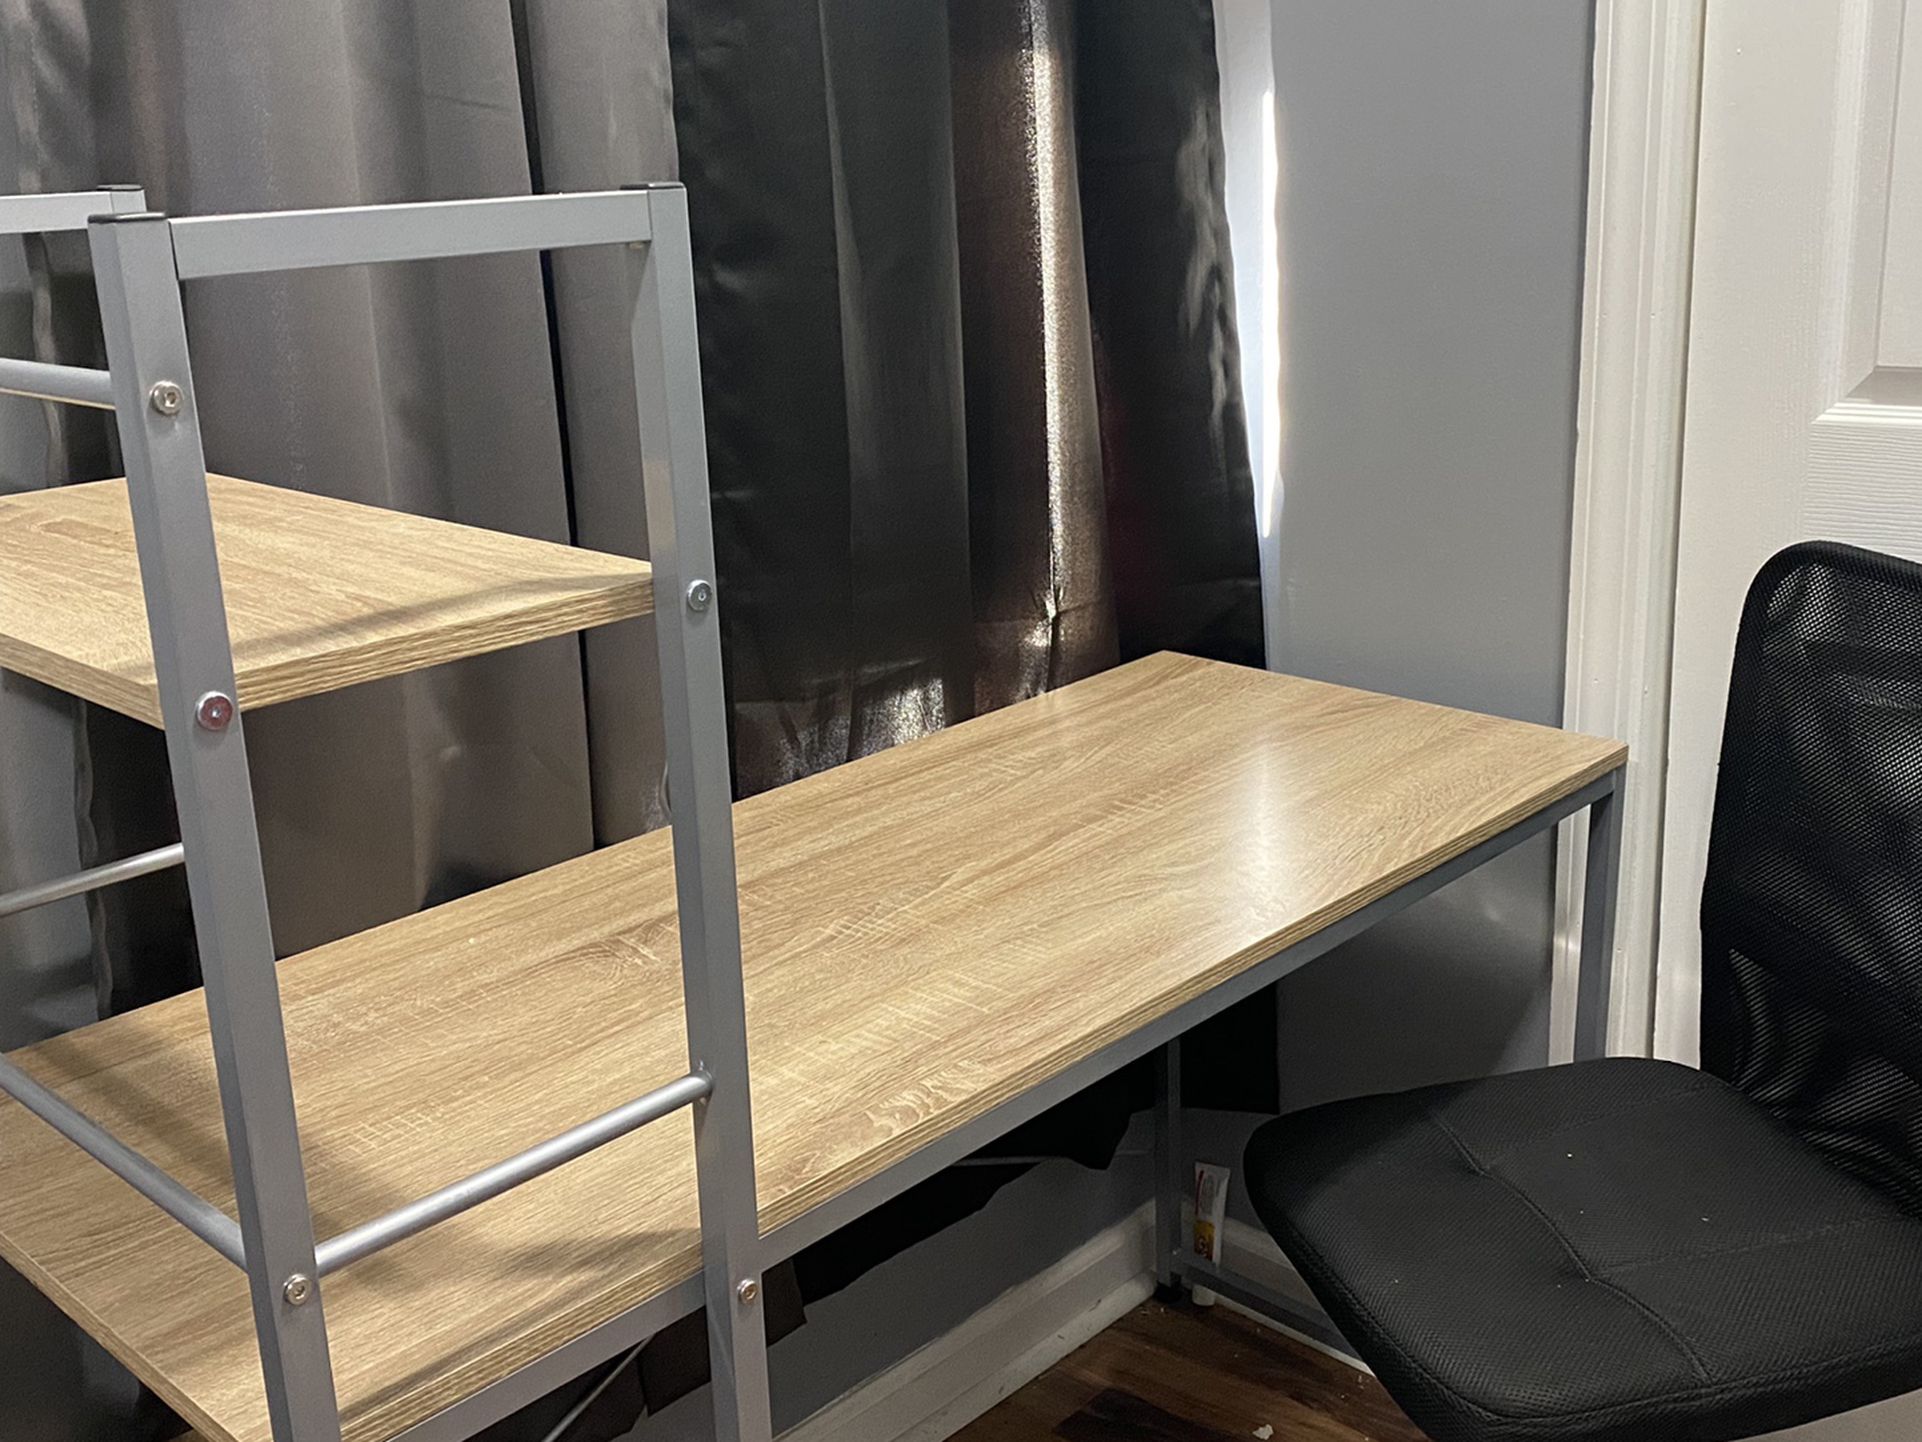 10/10, 43 In Long. $250 , Desk With Chair